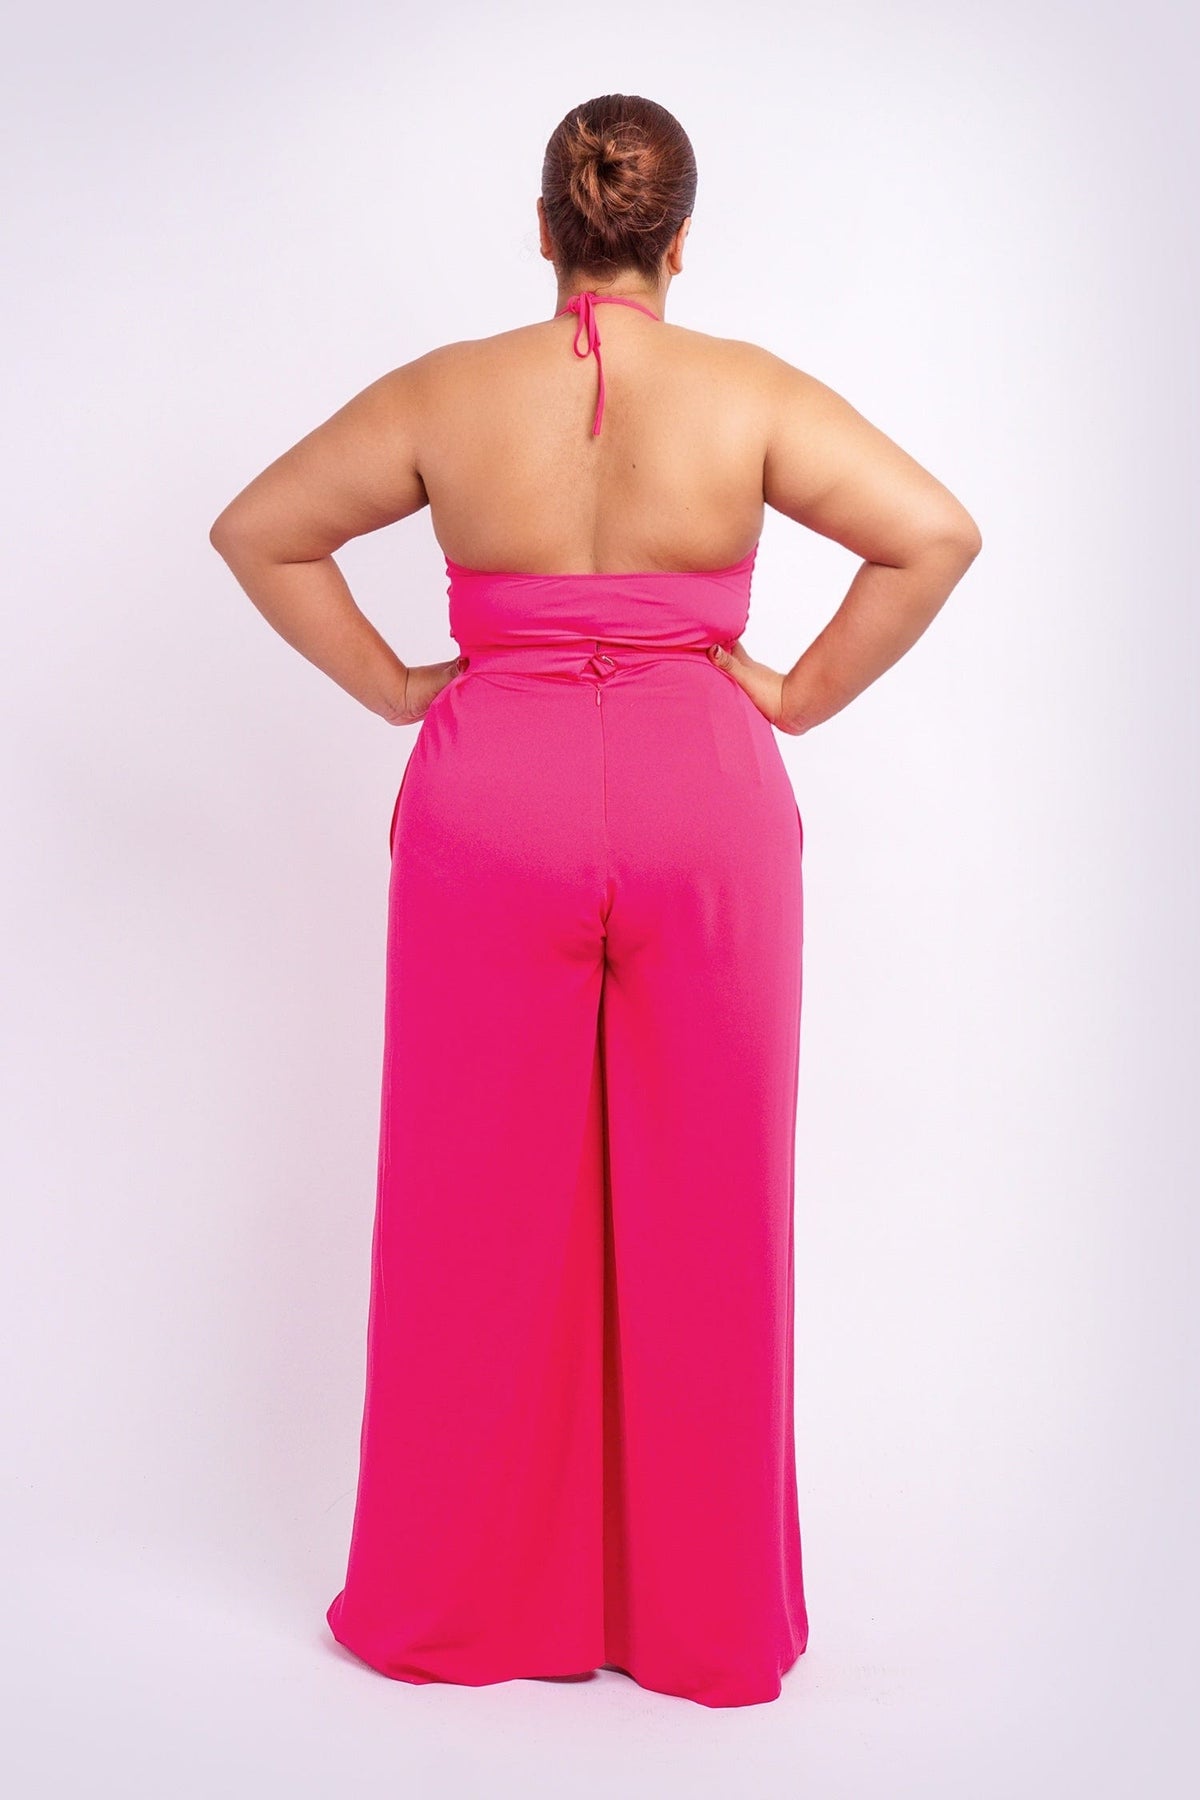 Chloe Dao BOTTOMS Pink Pleated High Waist Relaxing Leslie Pants